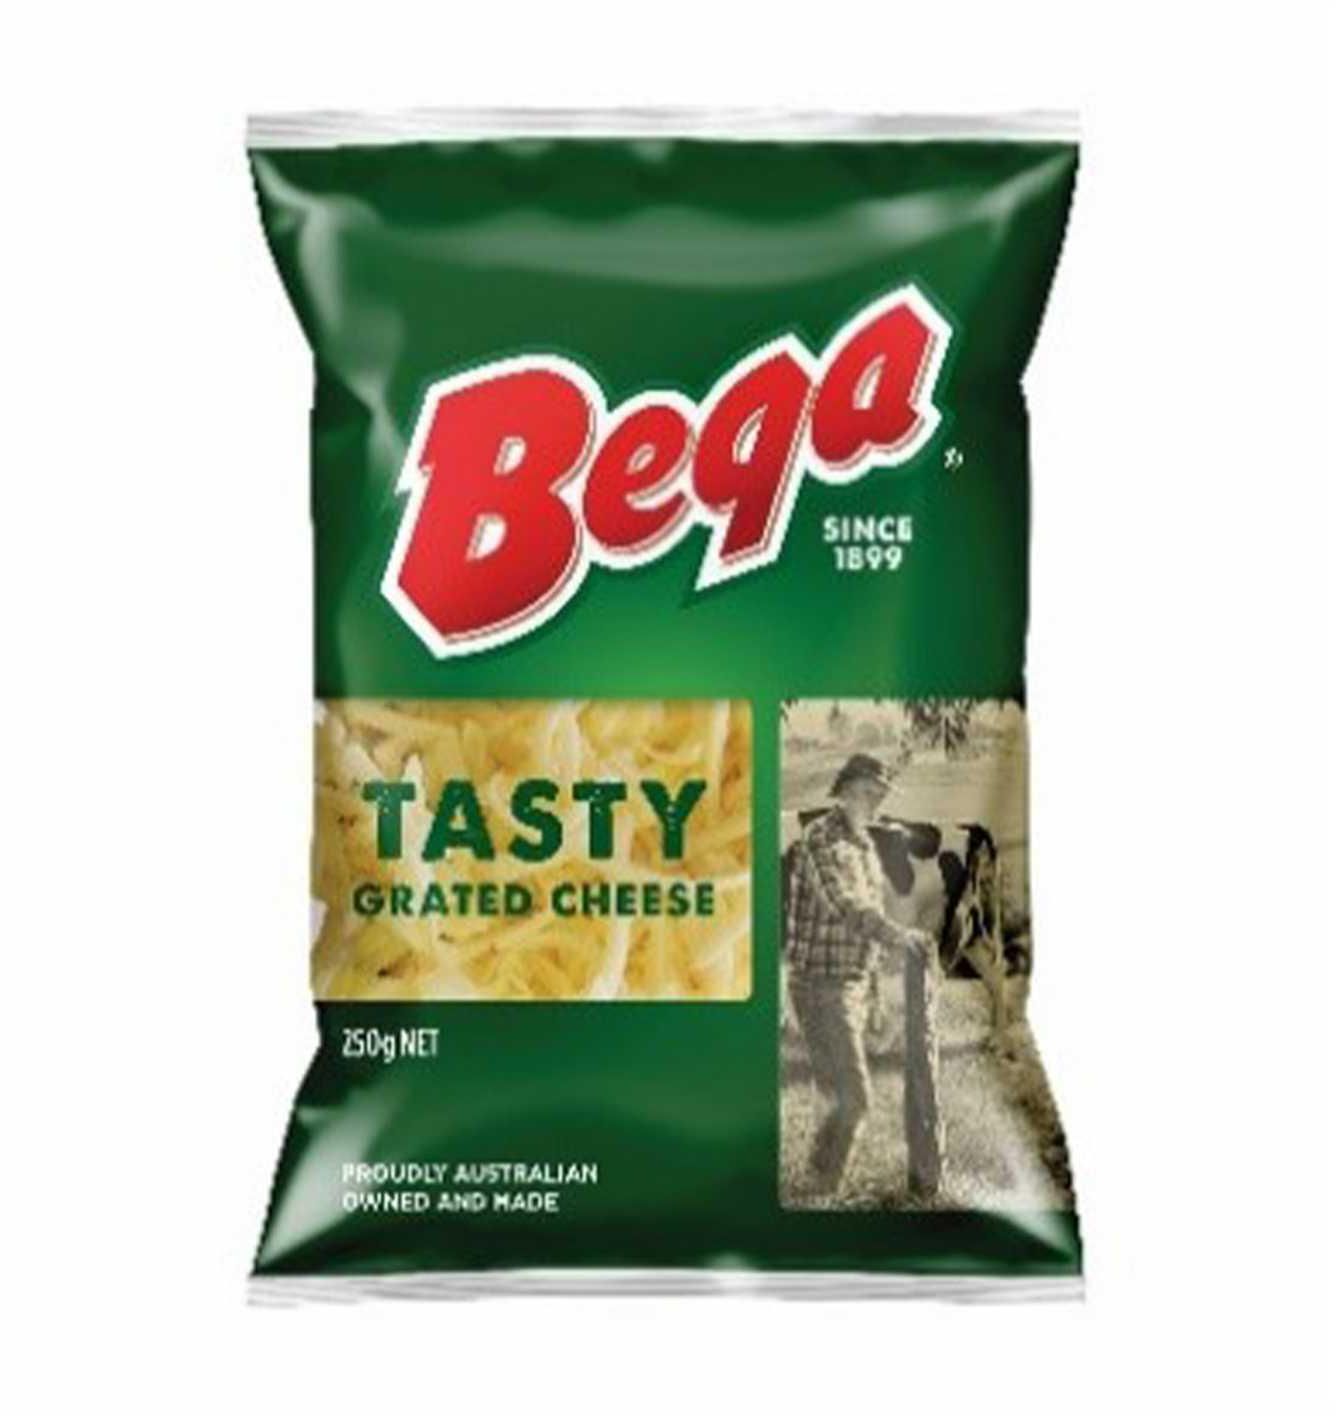 Bega Tasty Grated Cheese 250g